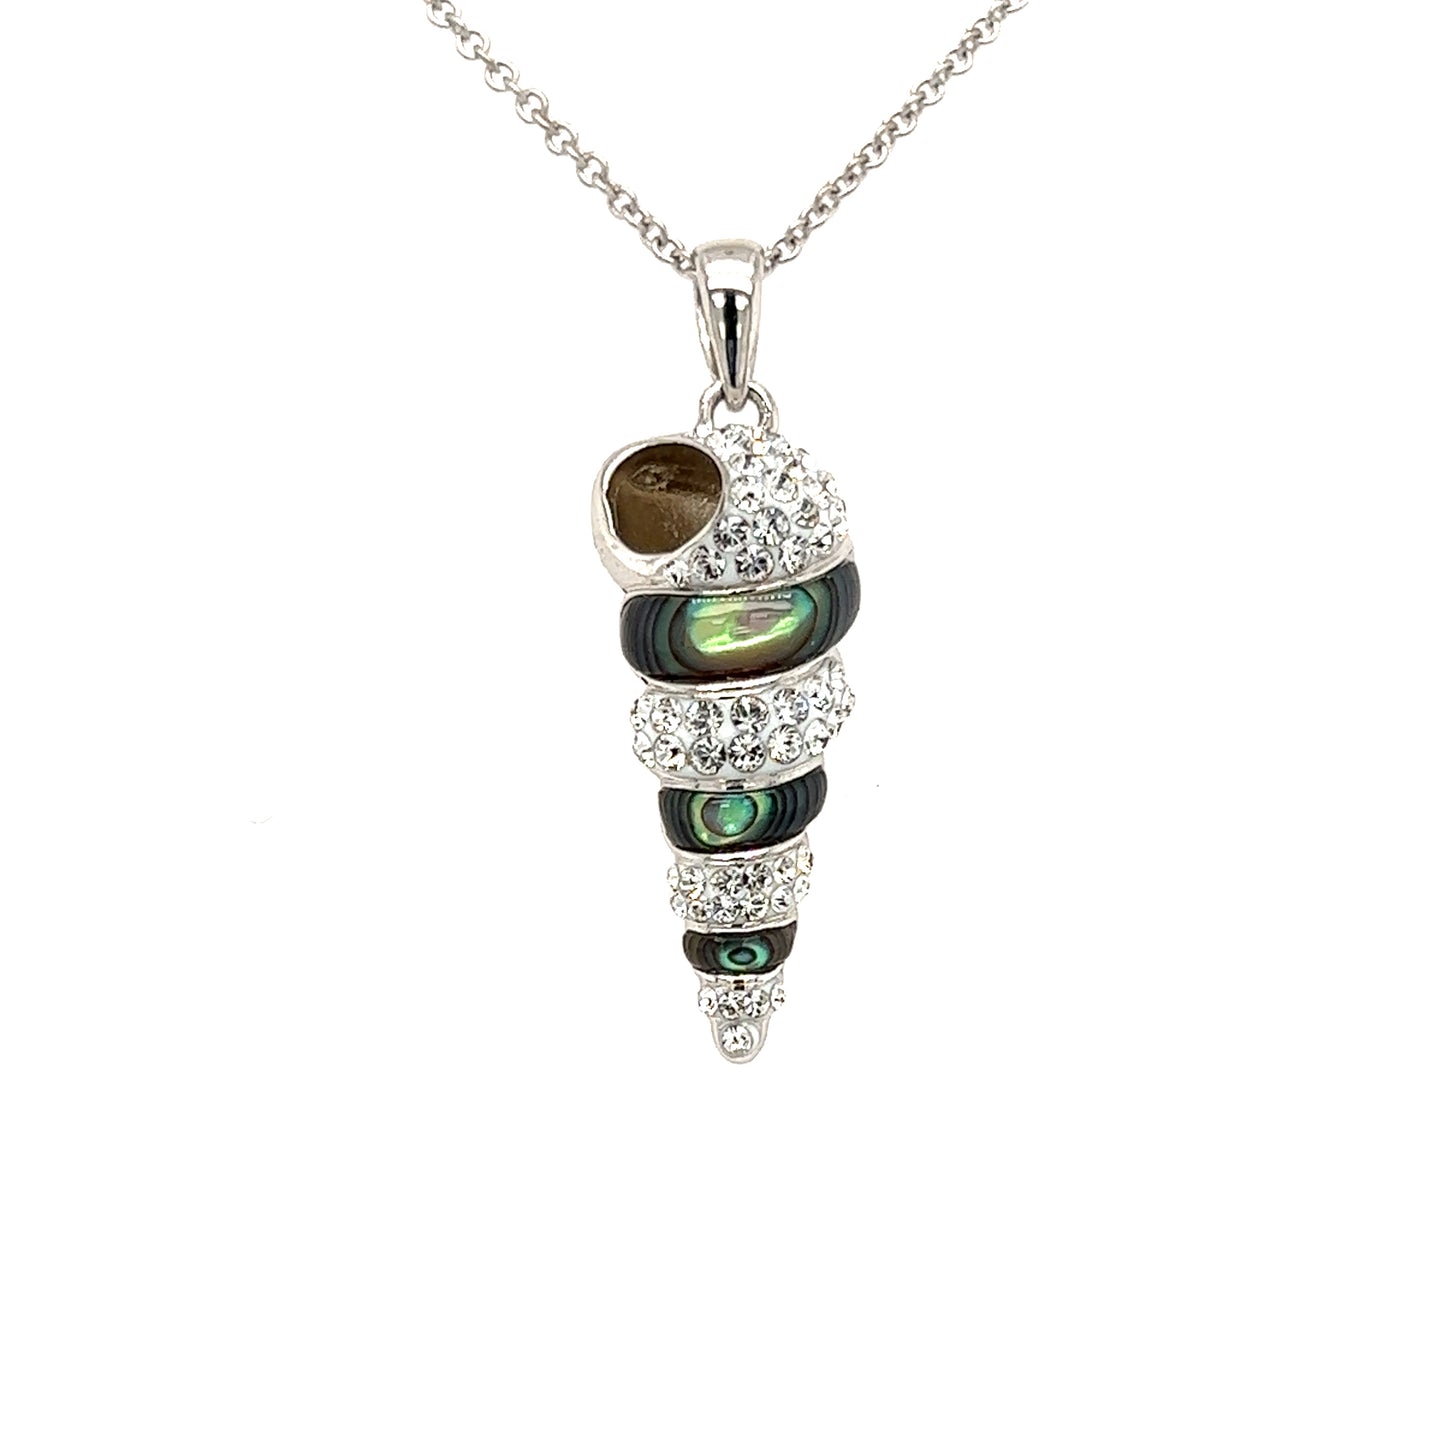 Abalone Shell Necklace with Swarovski Crystals in Sterling Silver Pendant View